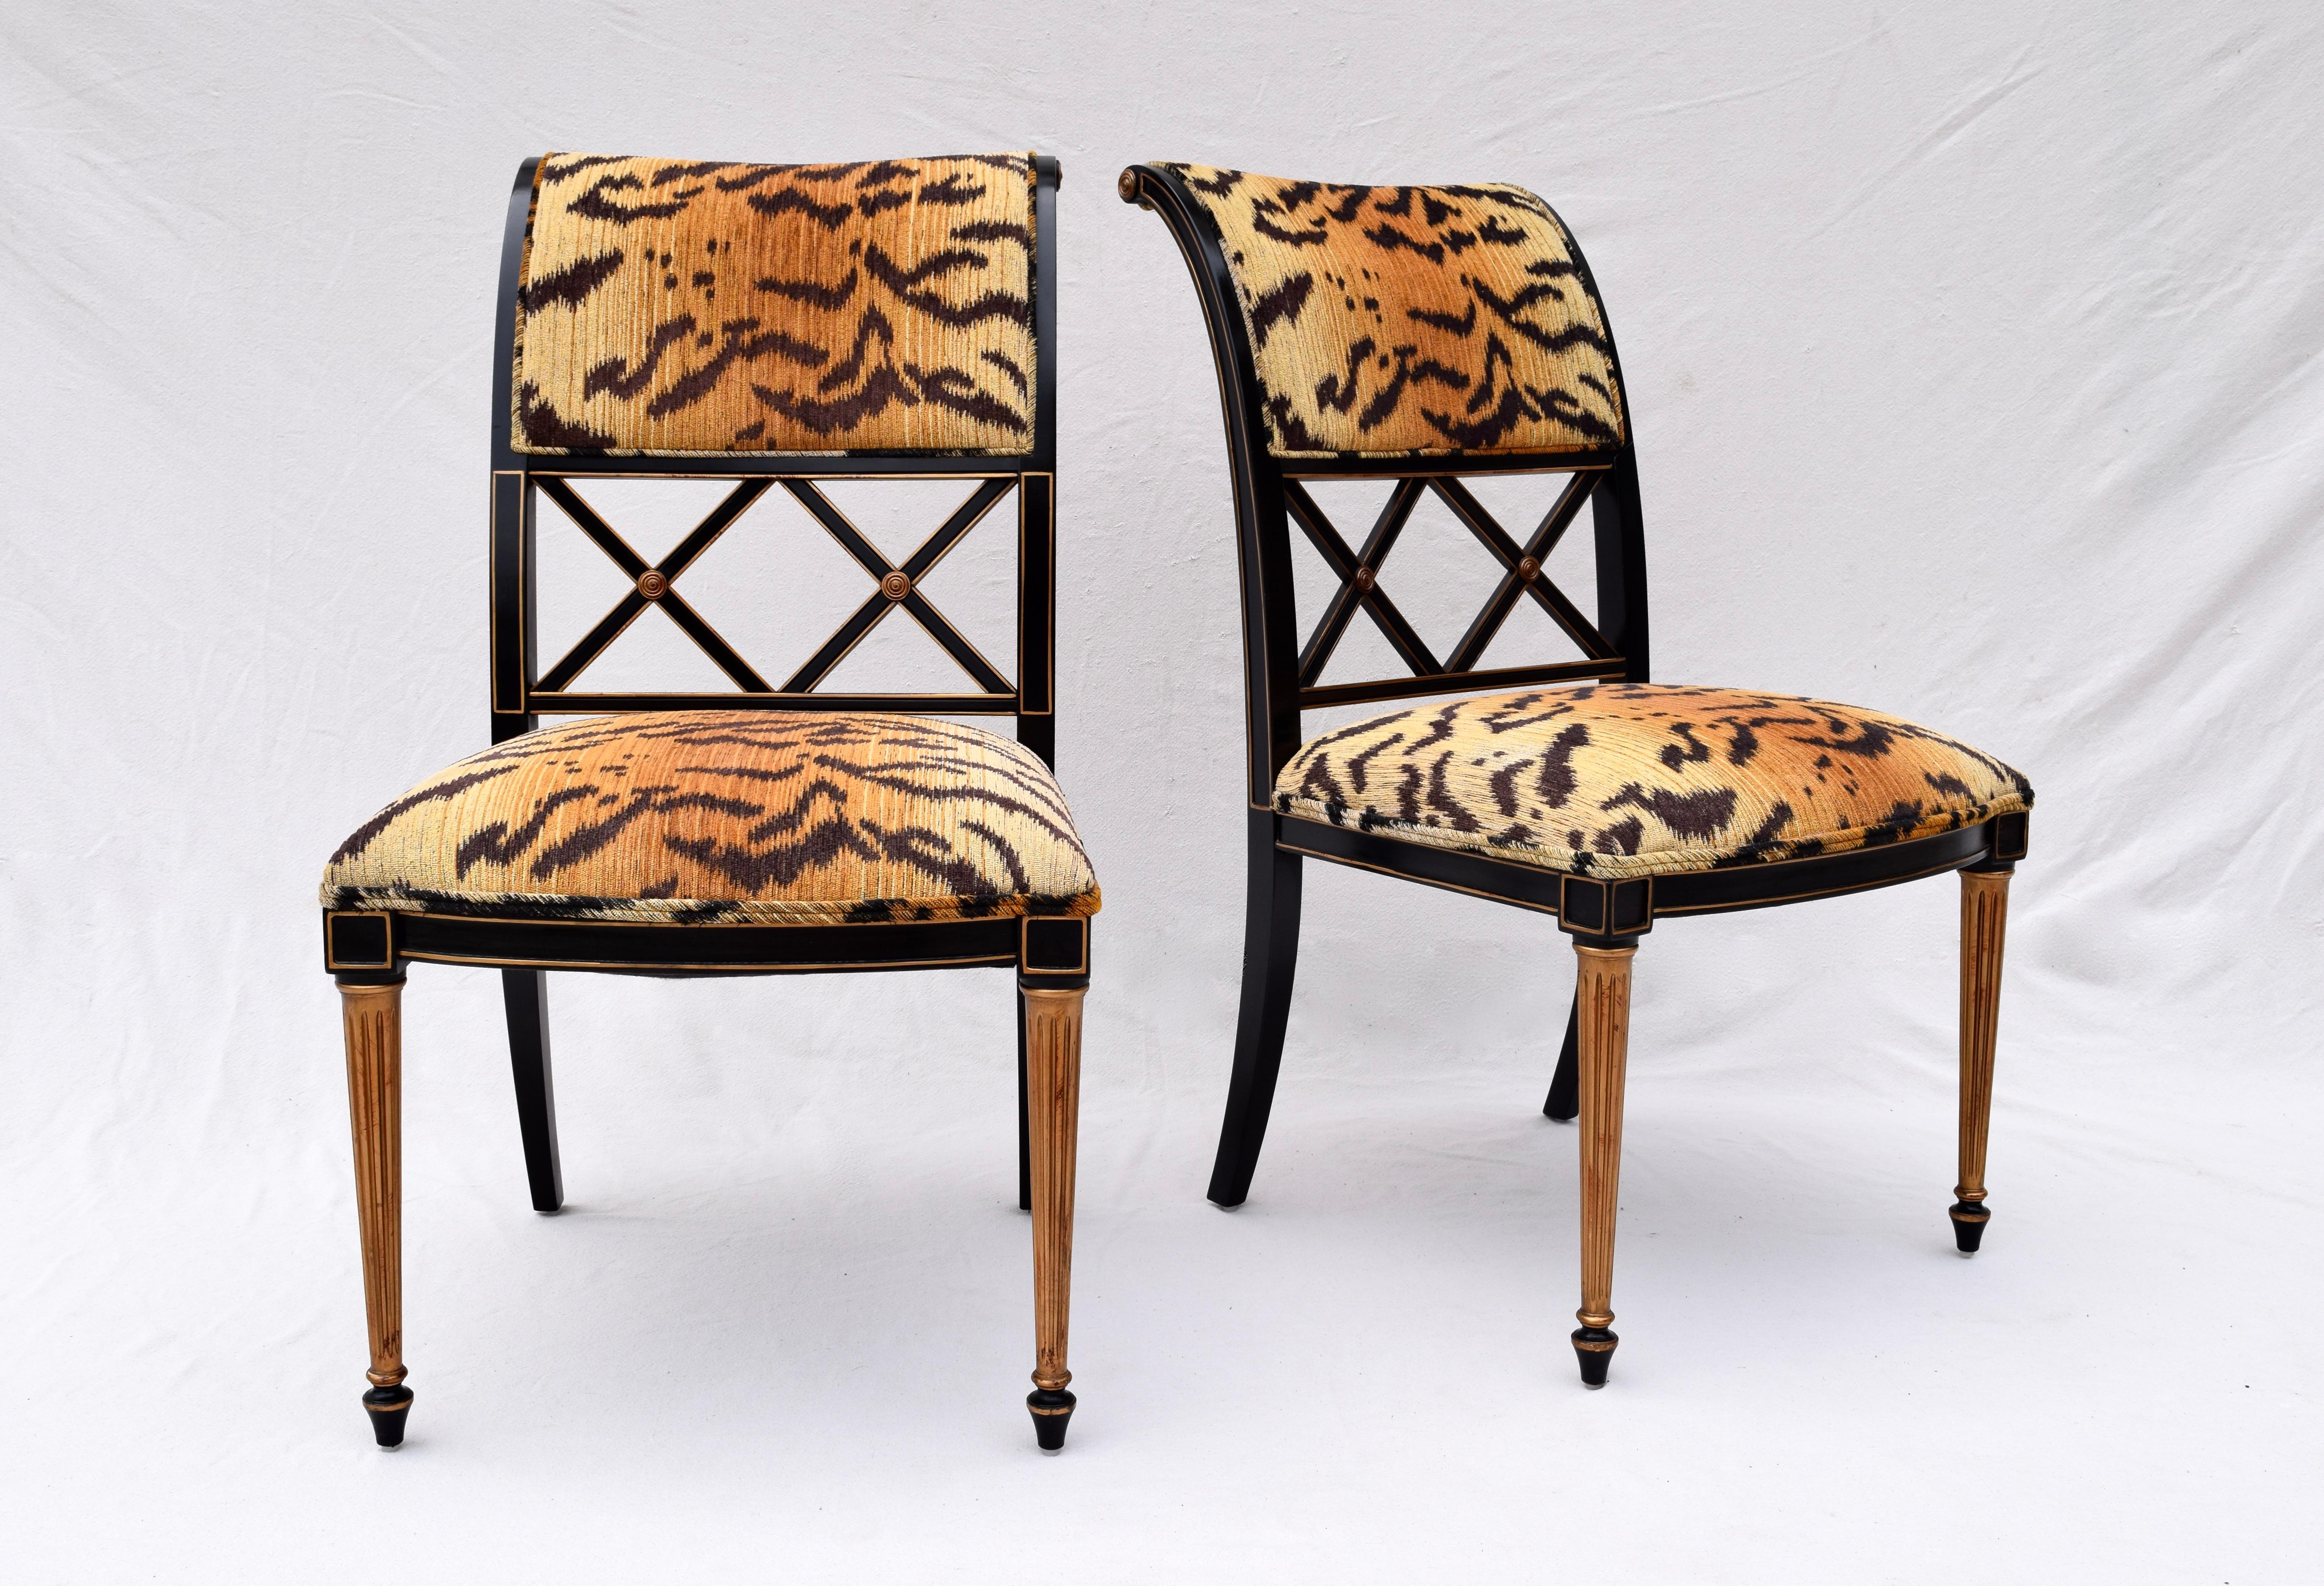 A pair of Regency style dining chairs attributed to Henredon Furniture in the manner of Dorothy Draper. Exceptional sculptural form with double X back splat design lacquered in black with gold accents, upholstered in striking Tigre Chenille.